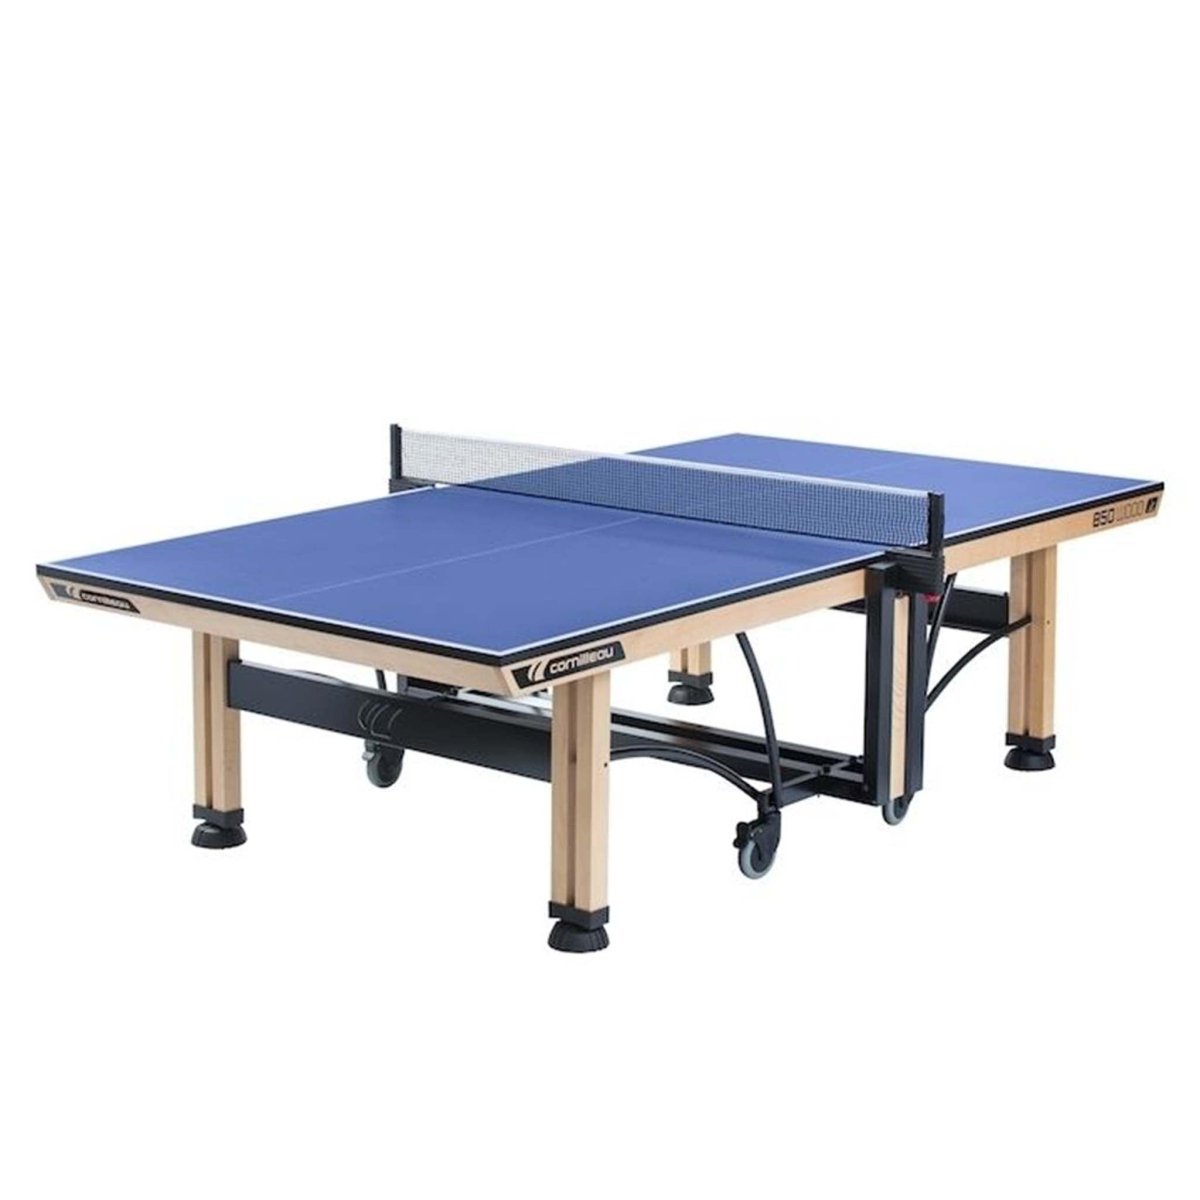 Cornilleau 850 Wood ITTF Indoor Table Tennis Table - Centric Billiard | Hong Kong's Premier Pool Table and Game Tables Retailer